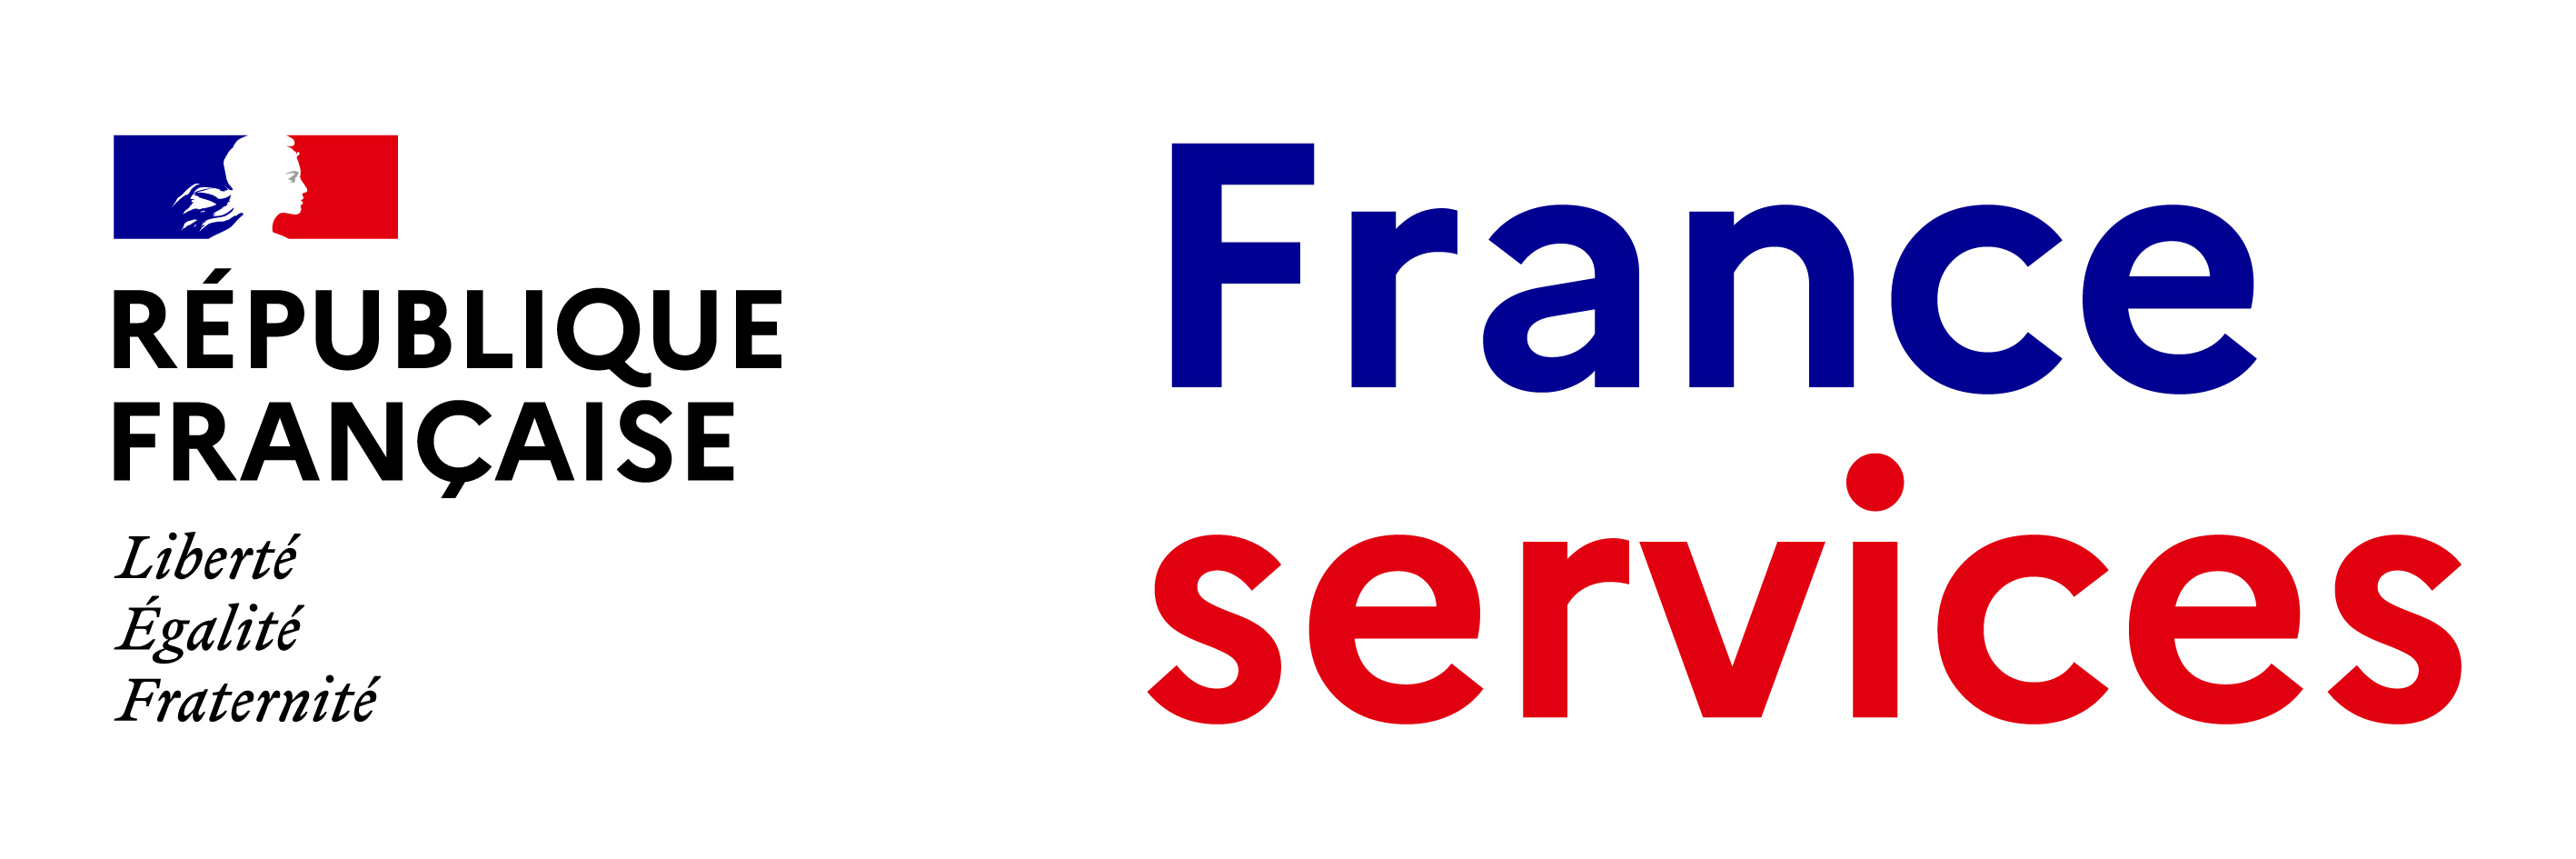 Permanence France Services